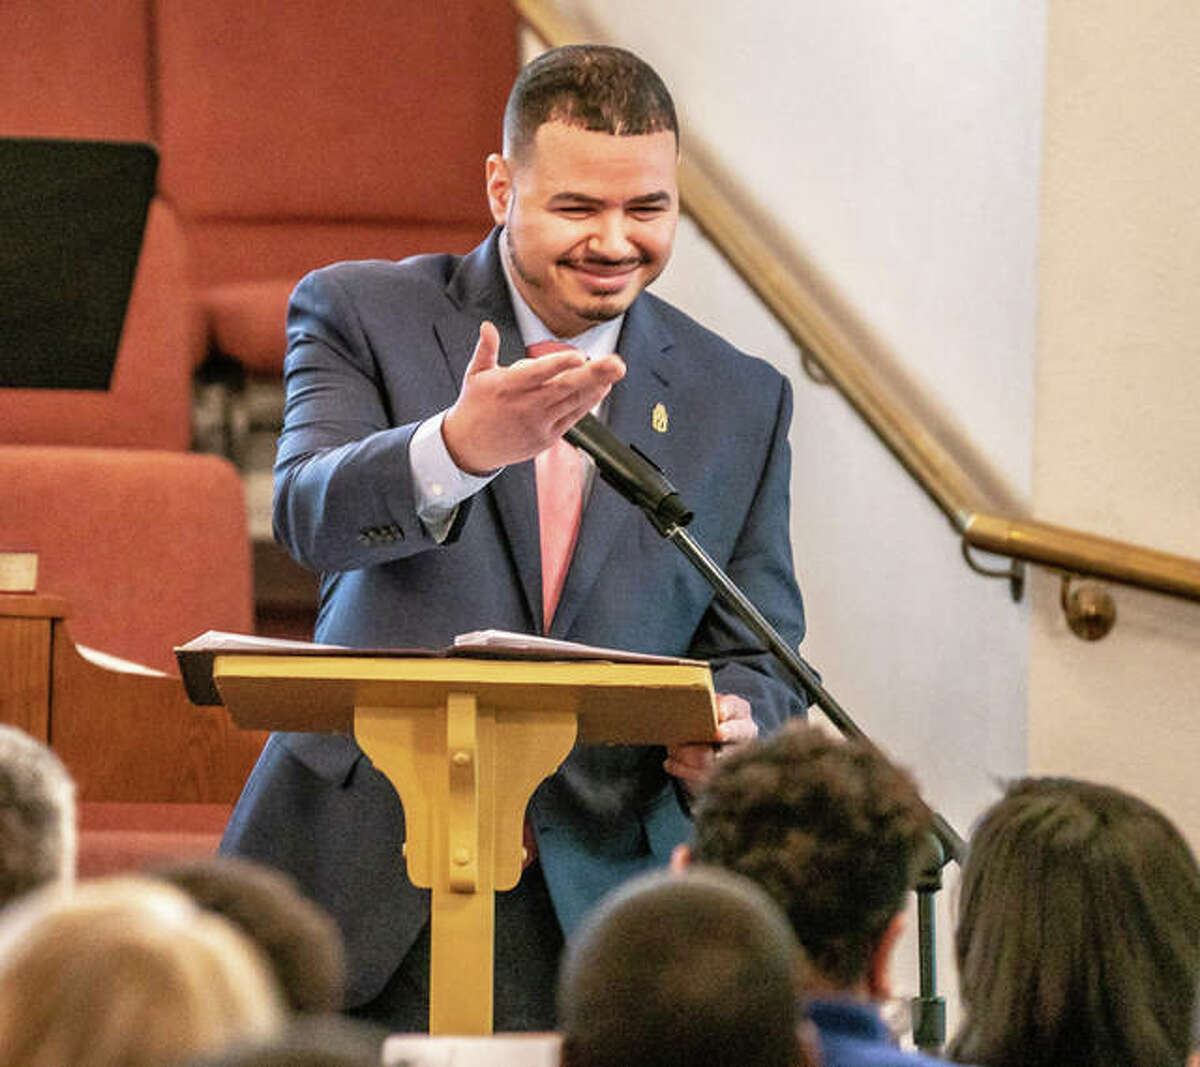 Anthony Kiekow delivers his keynote speech during Monday’s Martin Luther King Jr. Day celebration at Mt. Joy Missionary Baptist Church in Edwardsville.